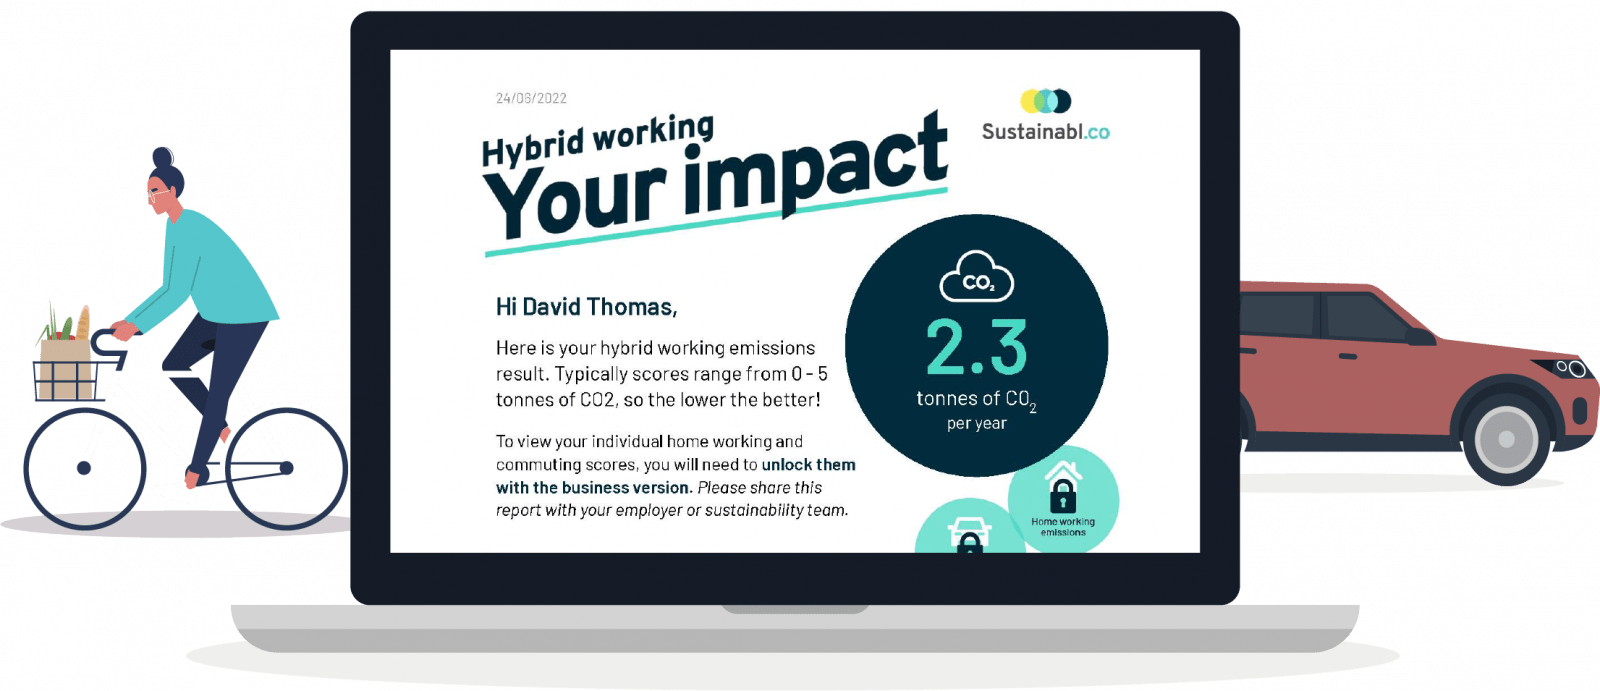 hybrid working your impact